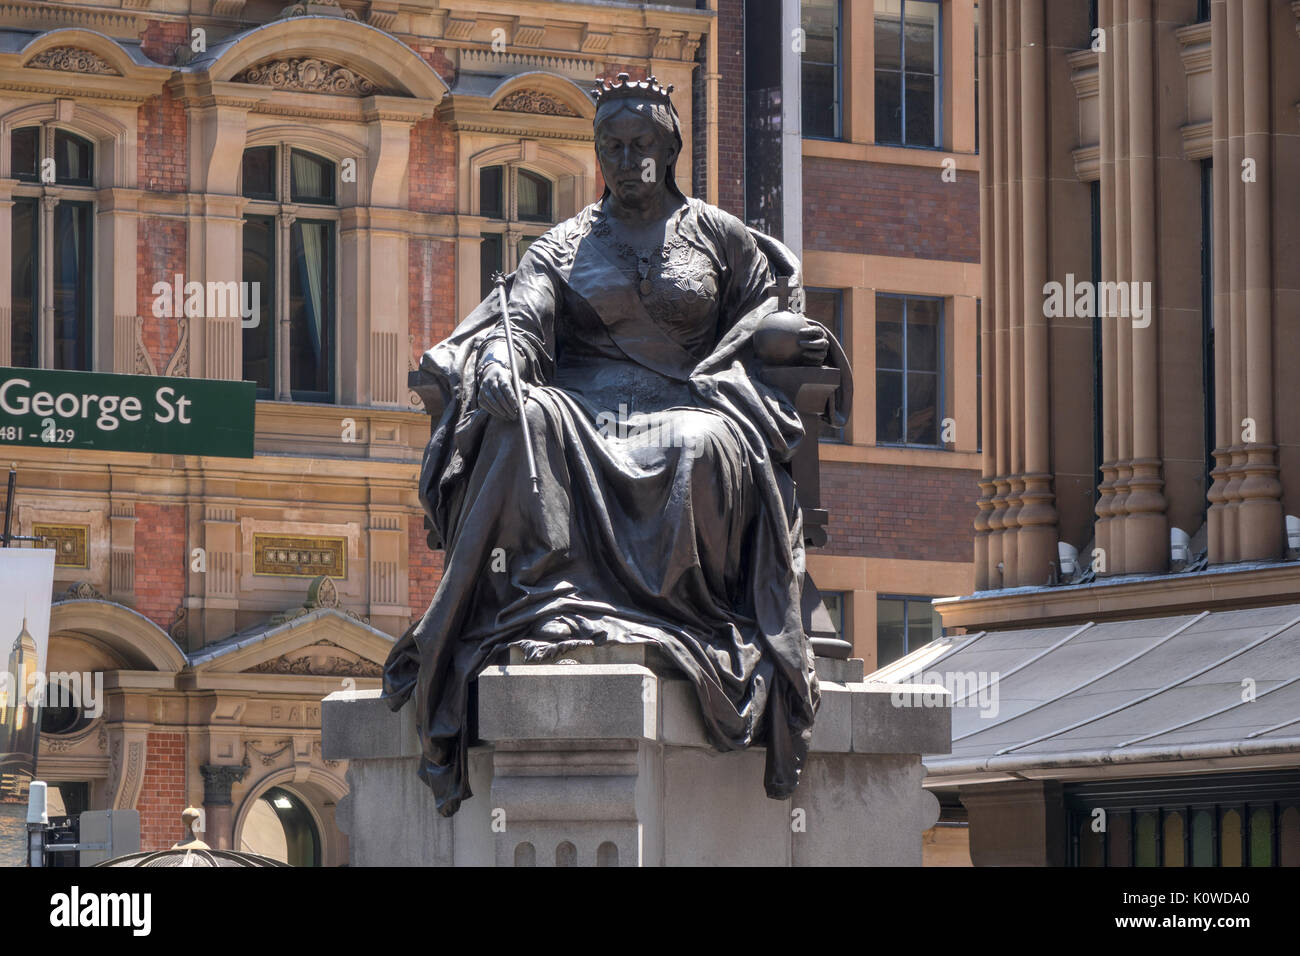 Queen Victoria Statue Outside The Queen Victoria Building On George Street Sydney Australia Stock Photo